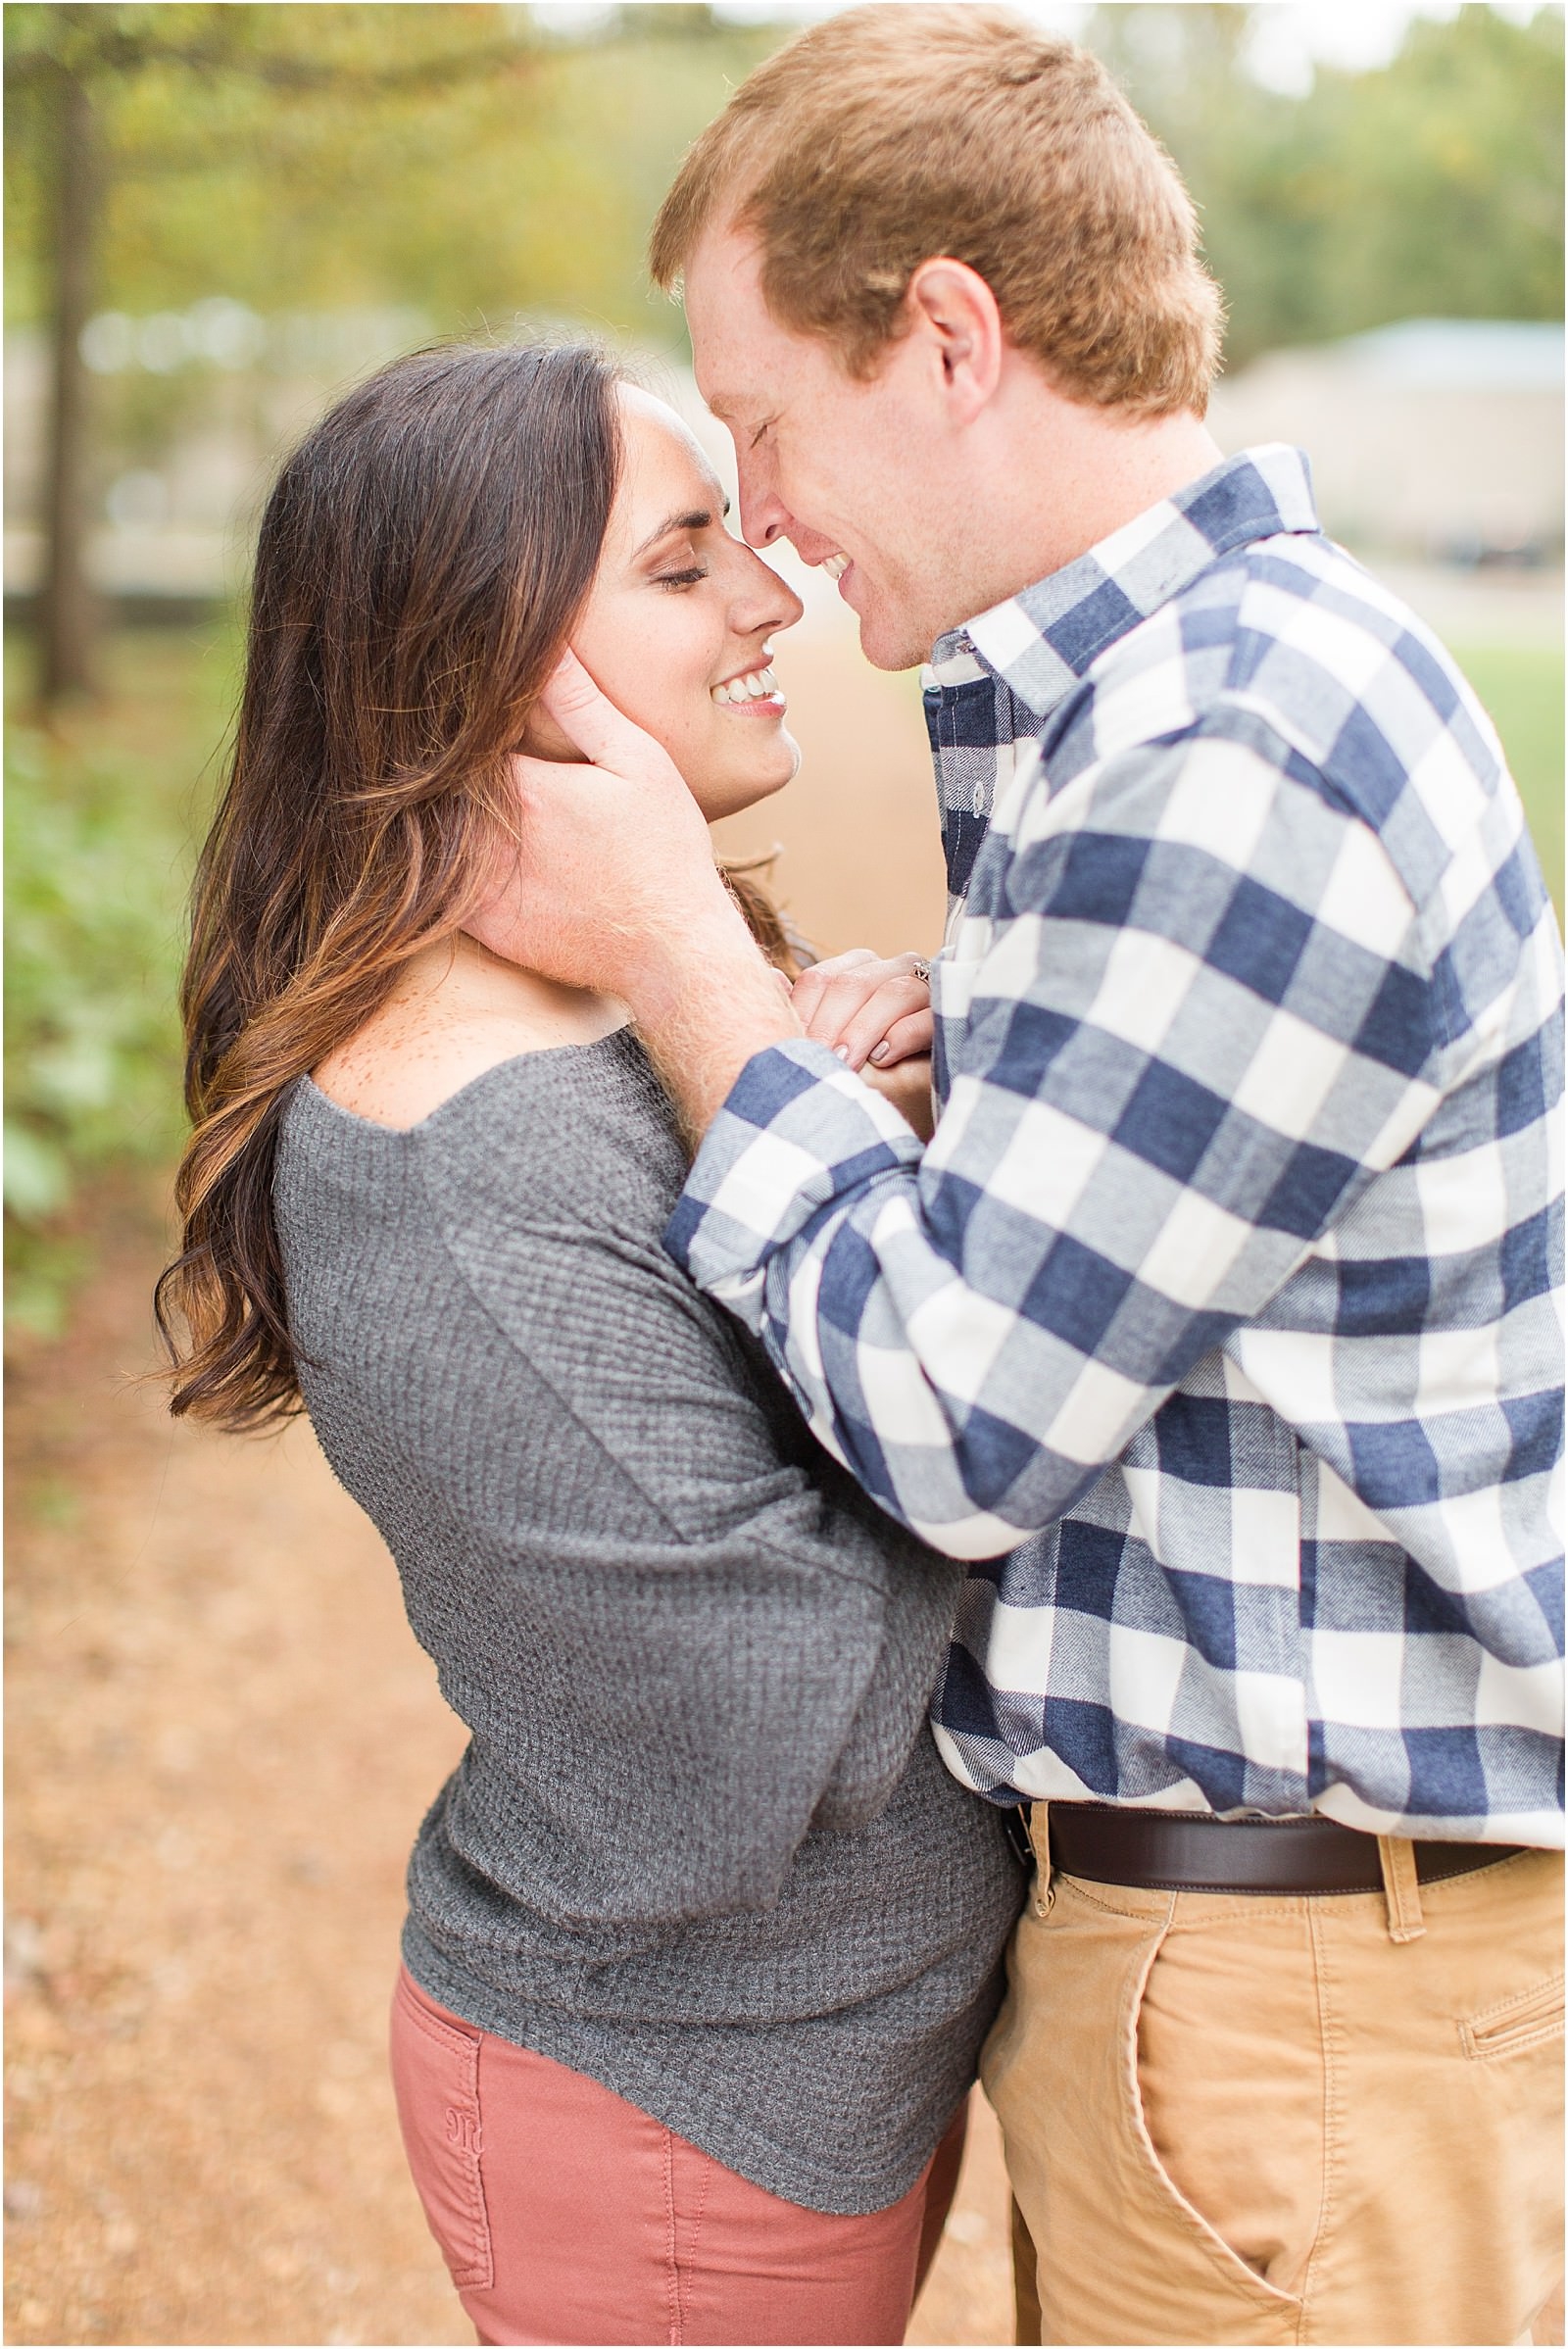 A Lincoln State Park Engagemtent Session | Deidra and Andrew | Bret and Brandie Photography 0008.jpg